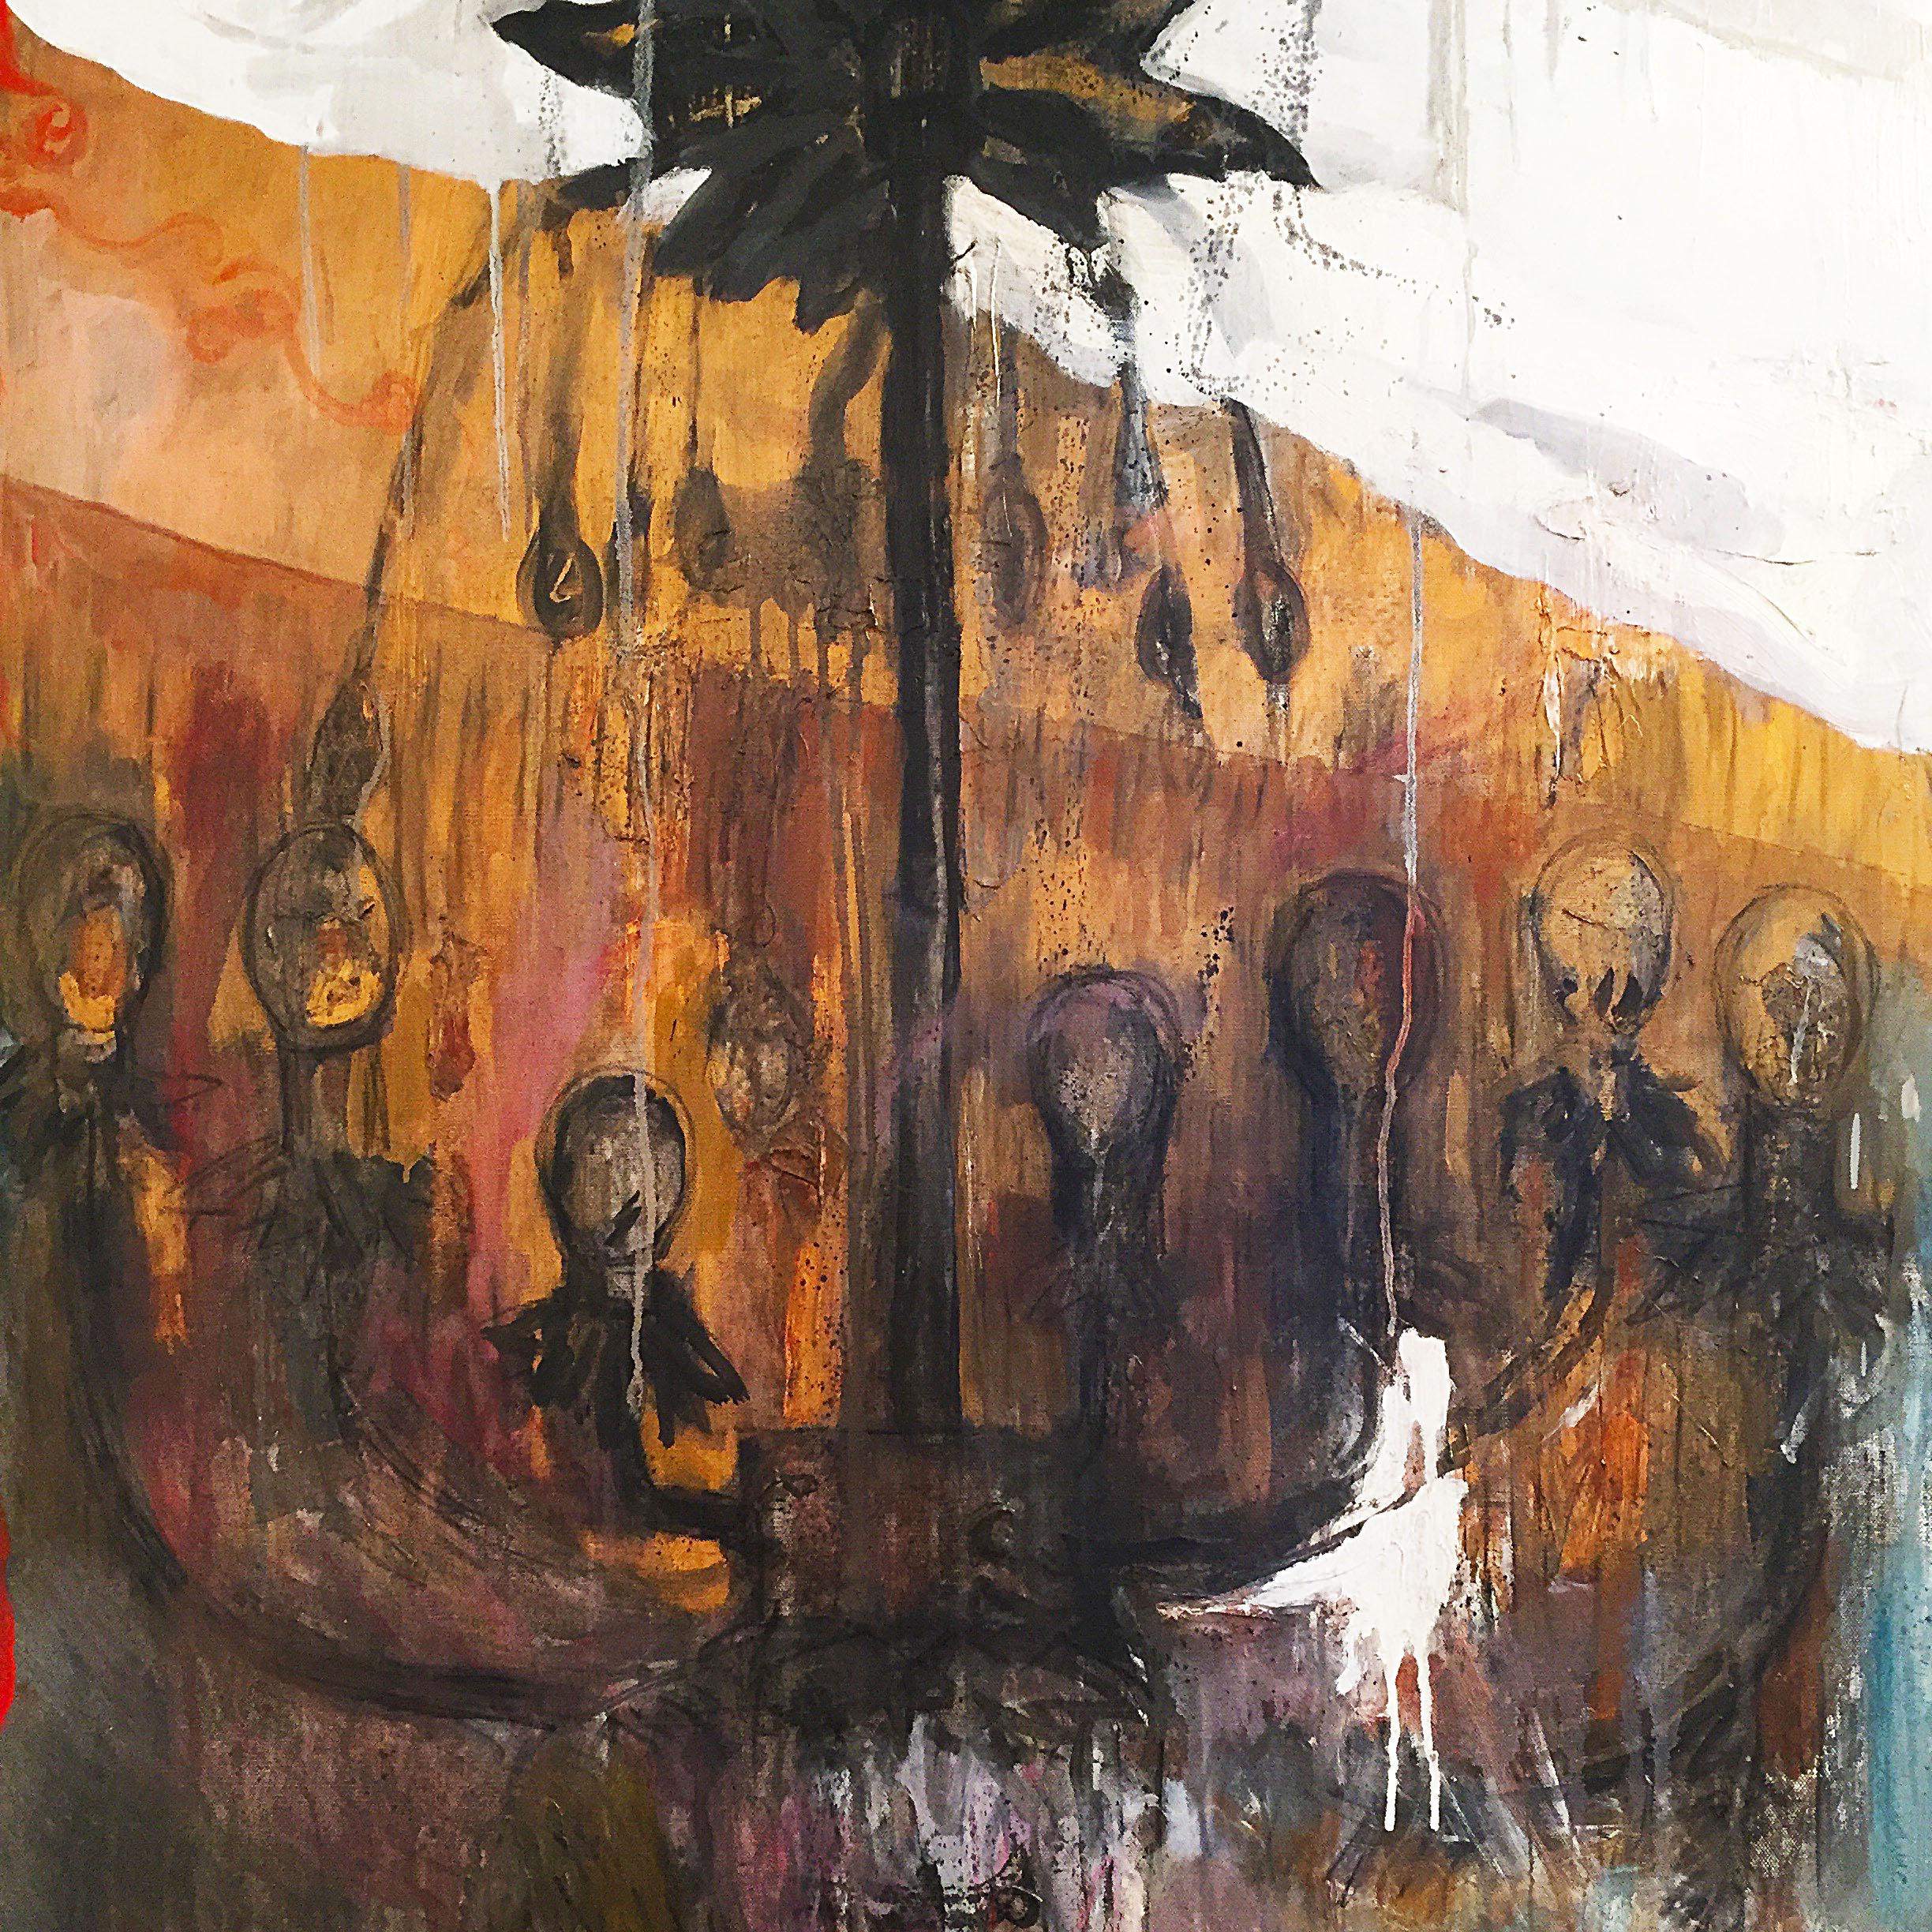 An explosive painting called 'The Chandelier', depicting a group of people seated around a chandelier. Light but strong brushstrokes fire up this painting. TiBor Cervenak was a former taxi driver in Belfast from the Czech Republic, who has a real